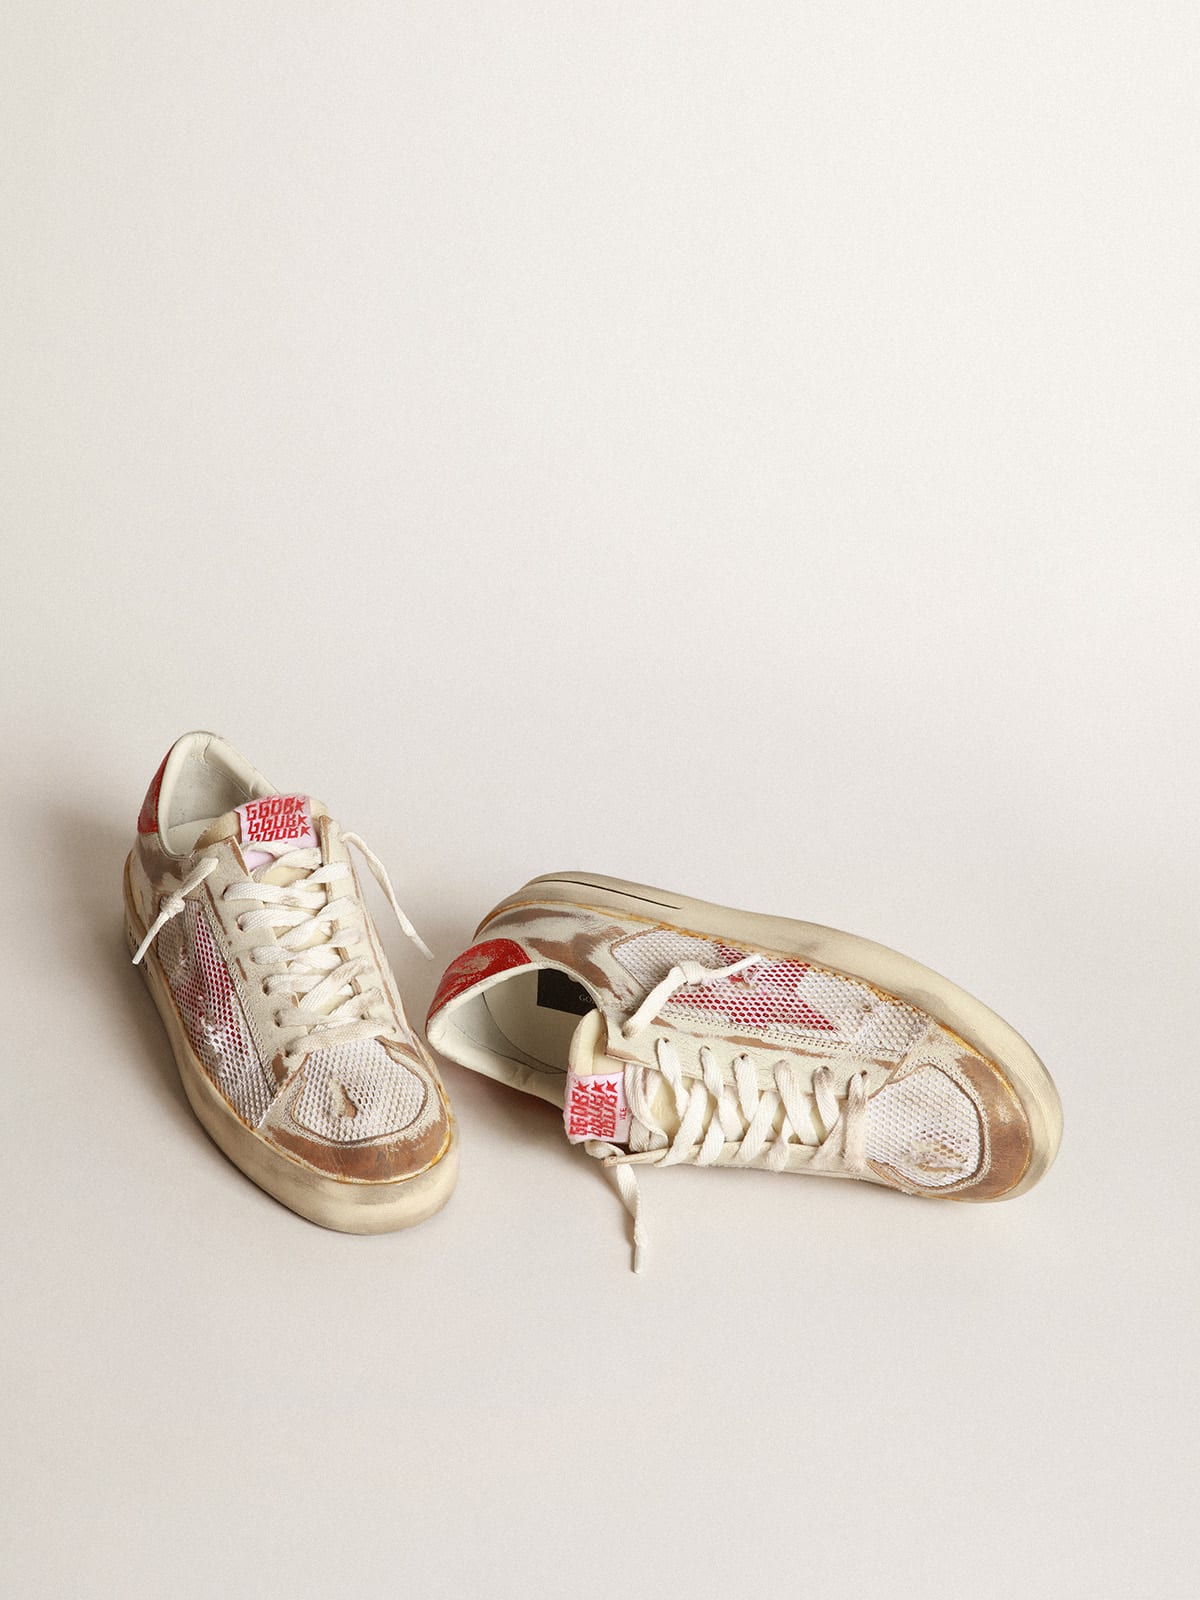 Golden Goose - Stardan LAB sneakers in white leather and mesh with red laminated leather star in 